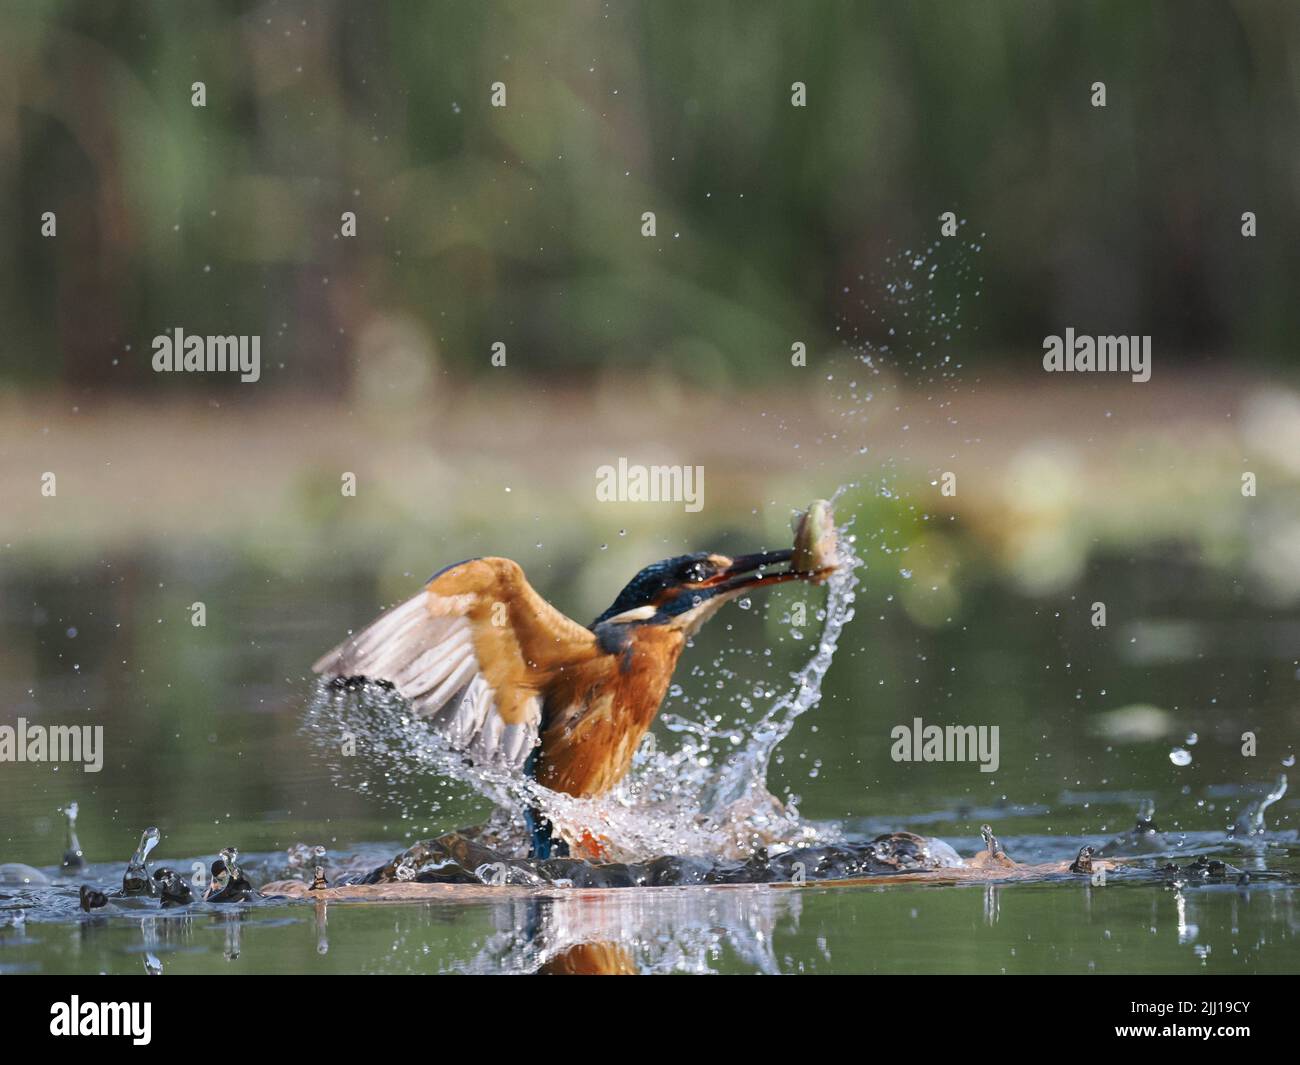 The kingfisher emerges from the water with a successful catch. UK: THESE BEAUTIFUL images mark a momentous occasion for this blind photographer as he Stock Photo